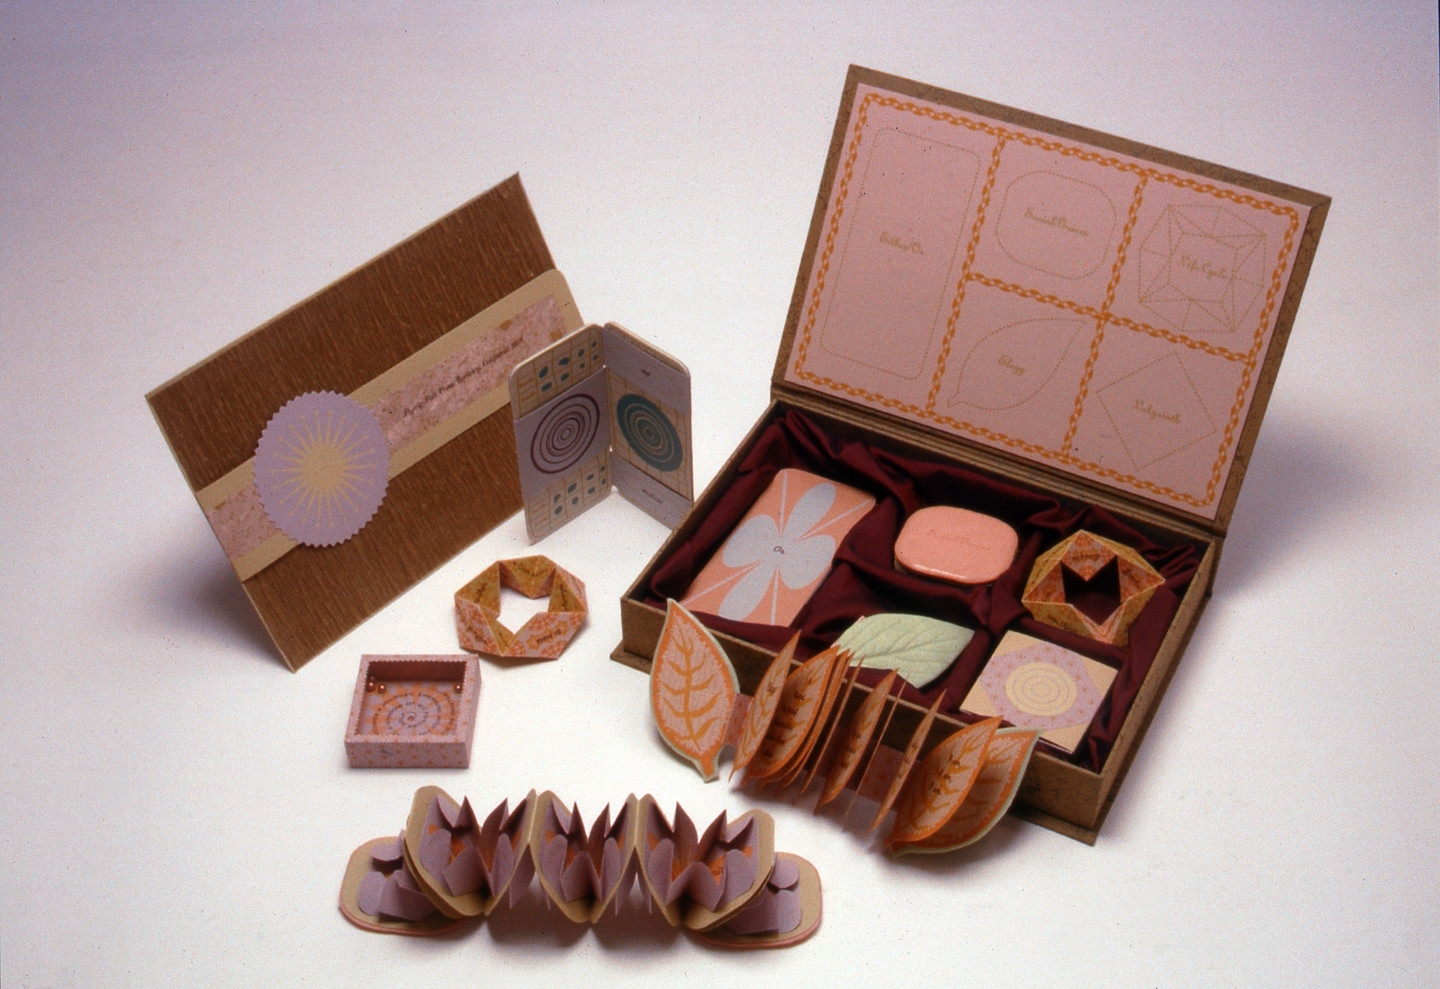 Multiple colorful objects sit spread out against a neutral background, including a rectangular box filled with more small objects, two small books spread open, a small box resembling a game, and other folded paper objects.